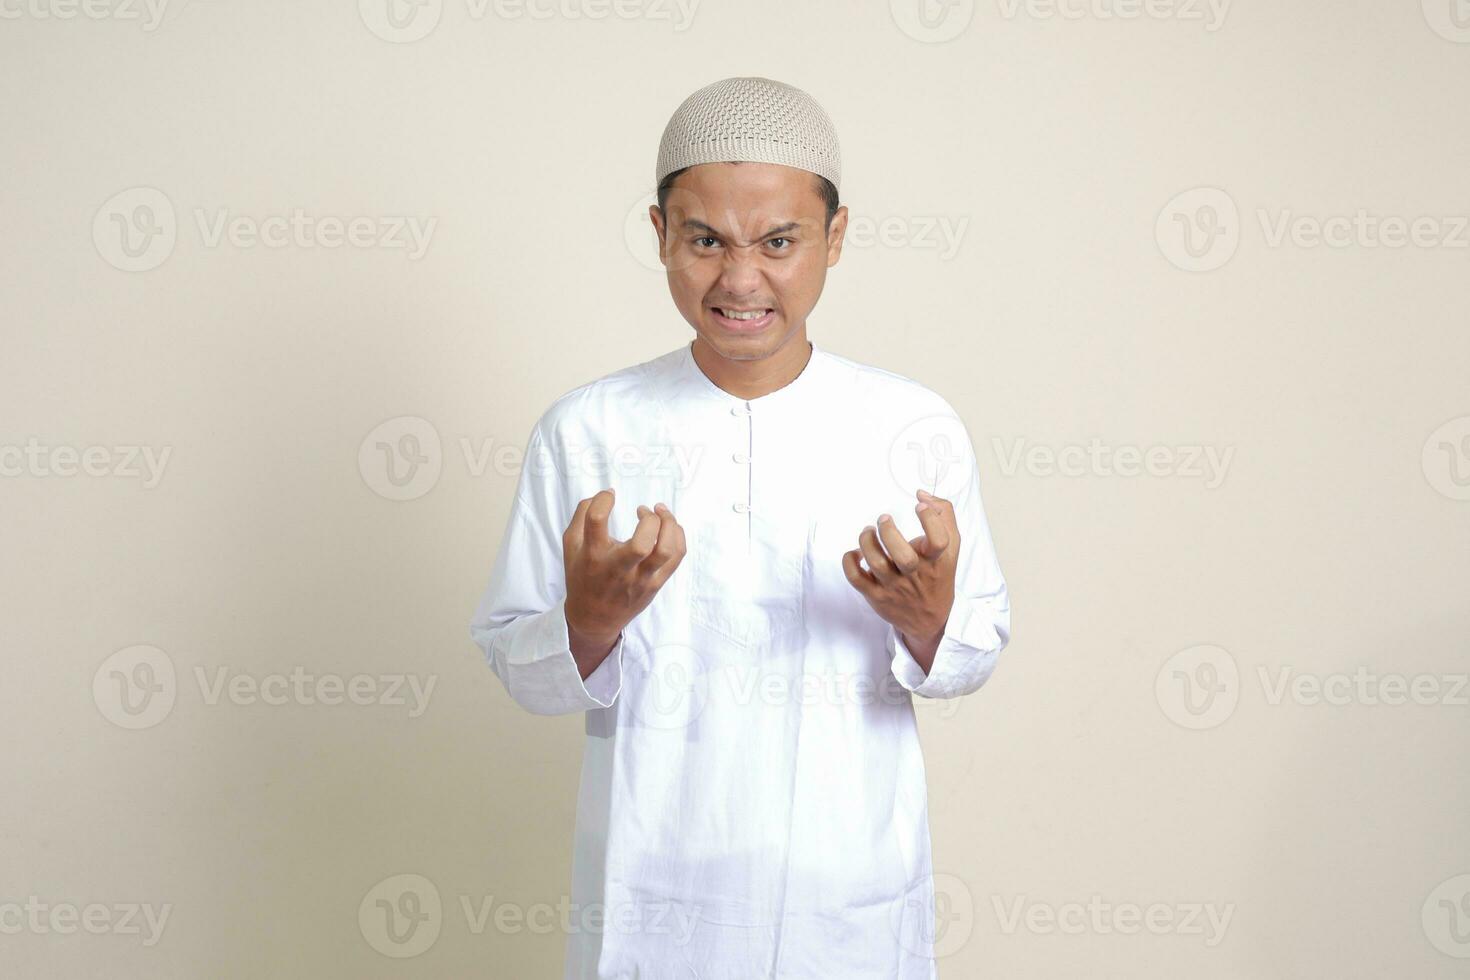 Portrait of attractive Asian muslim man in white shirt making angry hand gesture with fingers. Isolated image on gray background photo